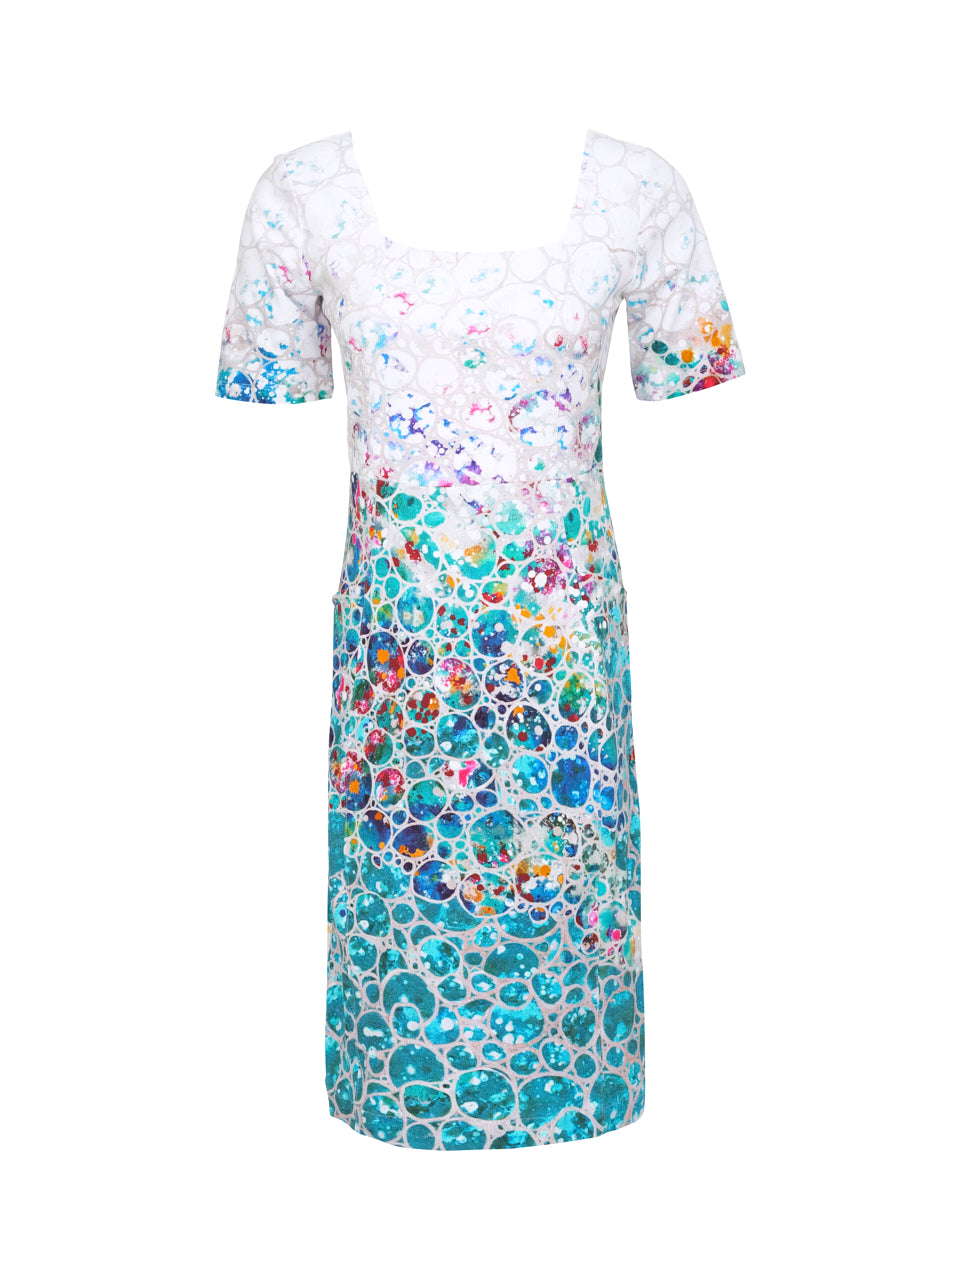 Multicoloured Dress with Square Neck and Pockets